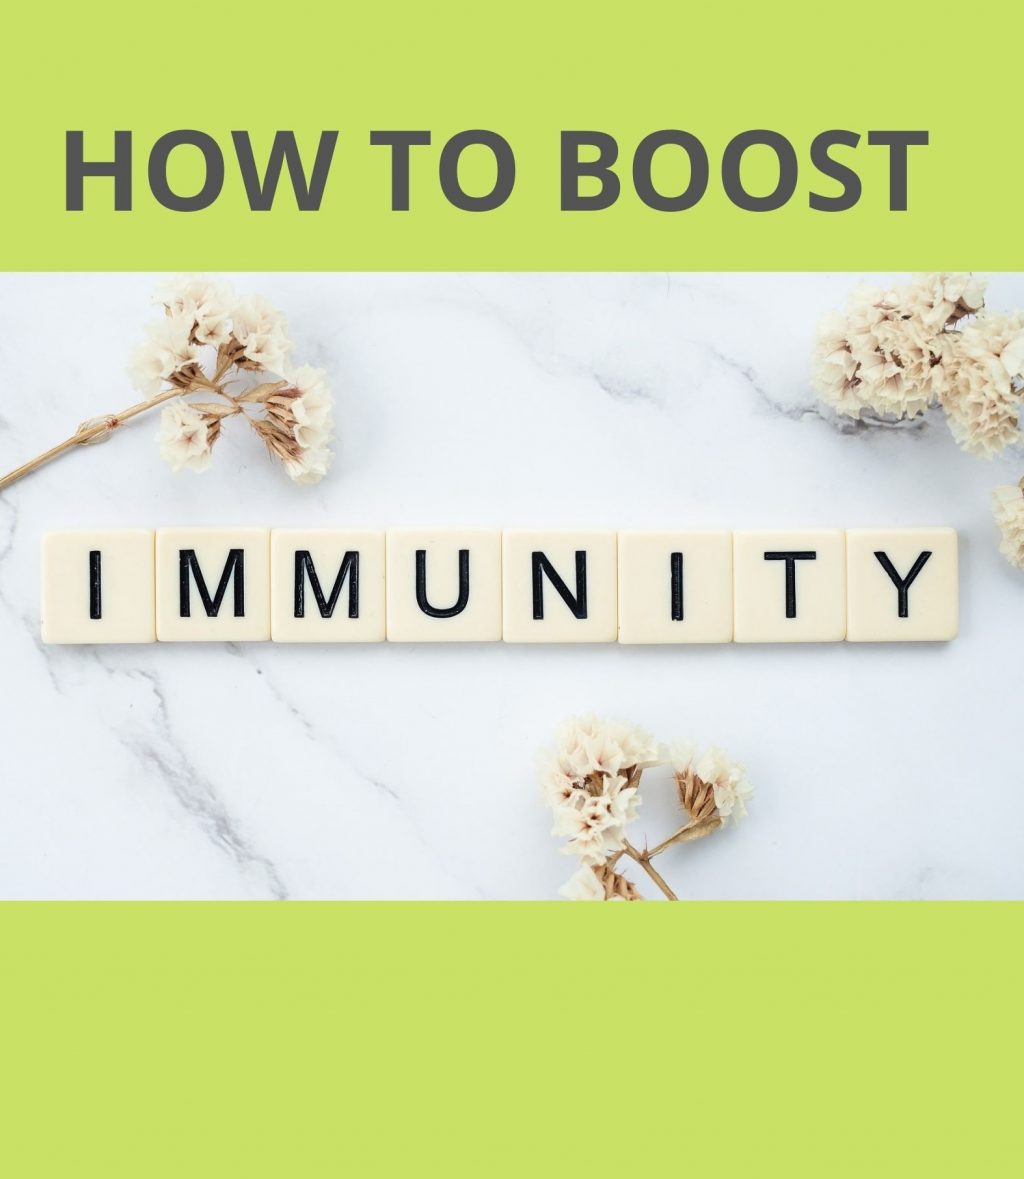 How to Boost Immunity?